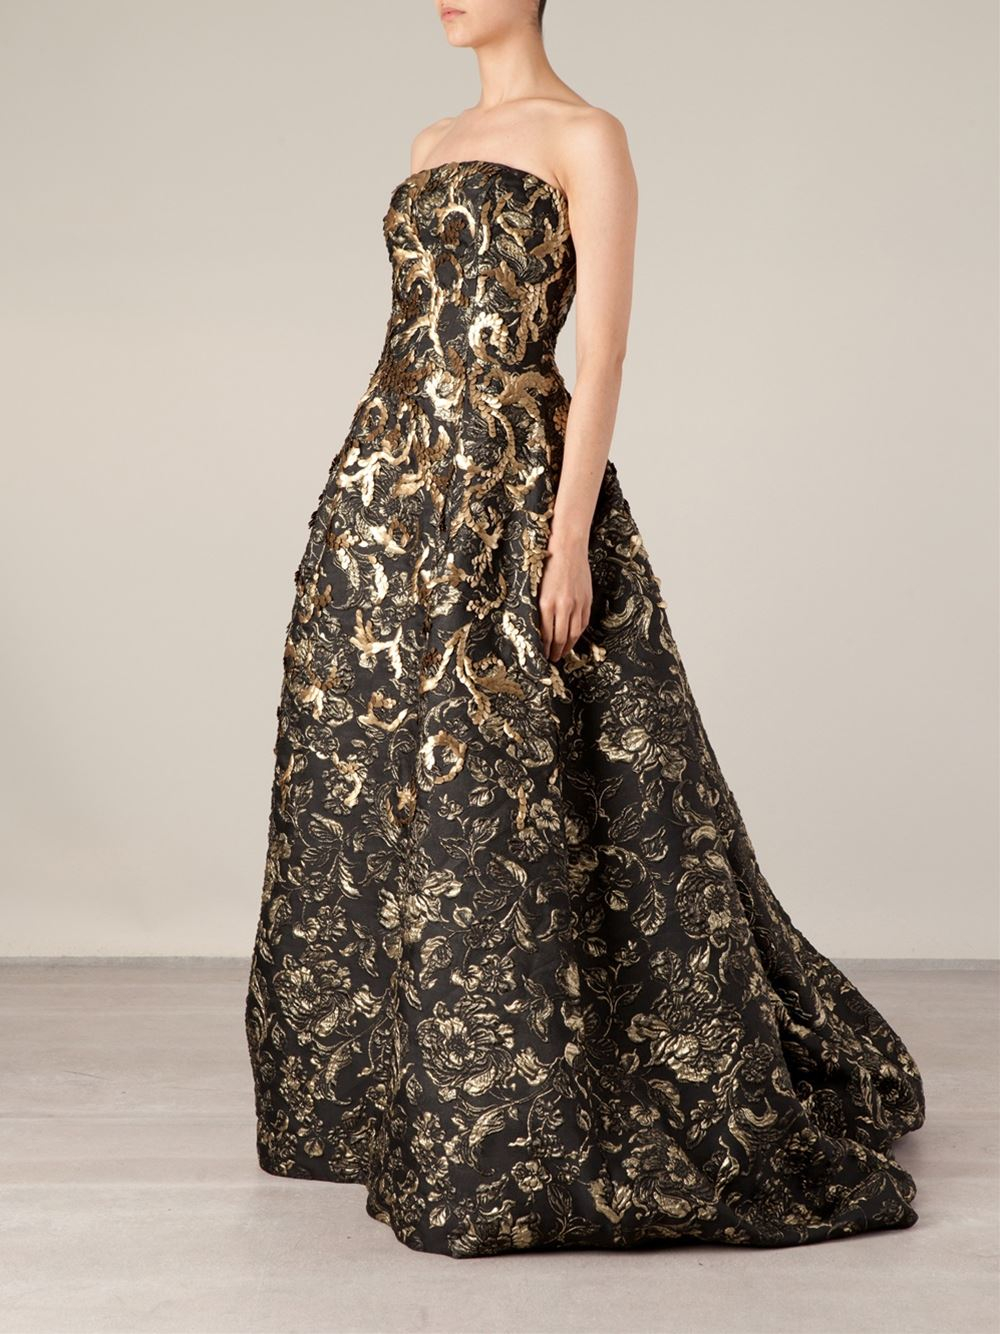 Floral Brocade Evening Gown ...